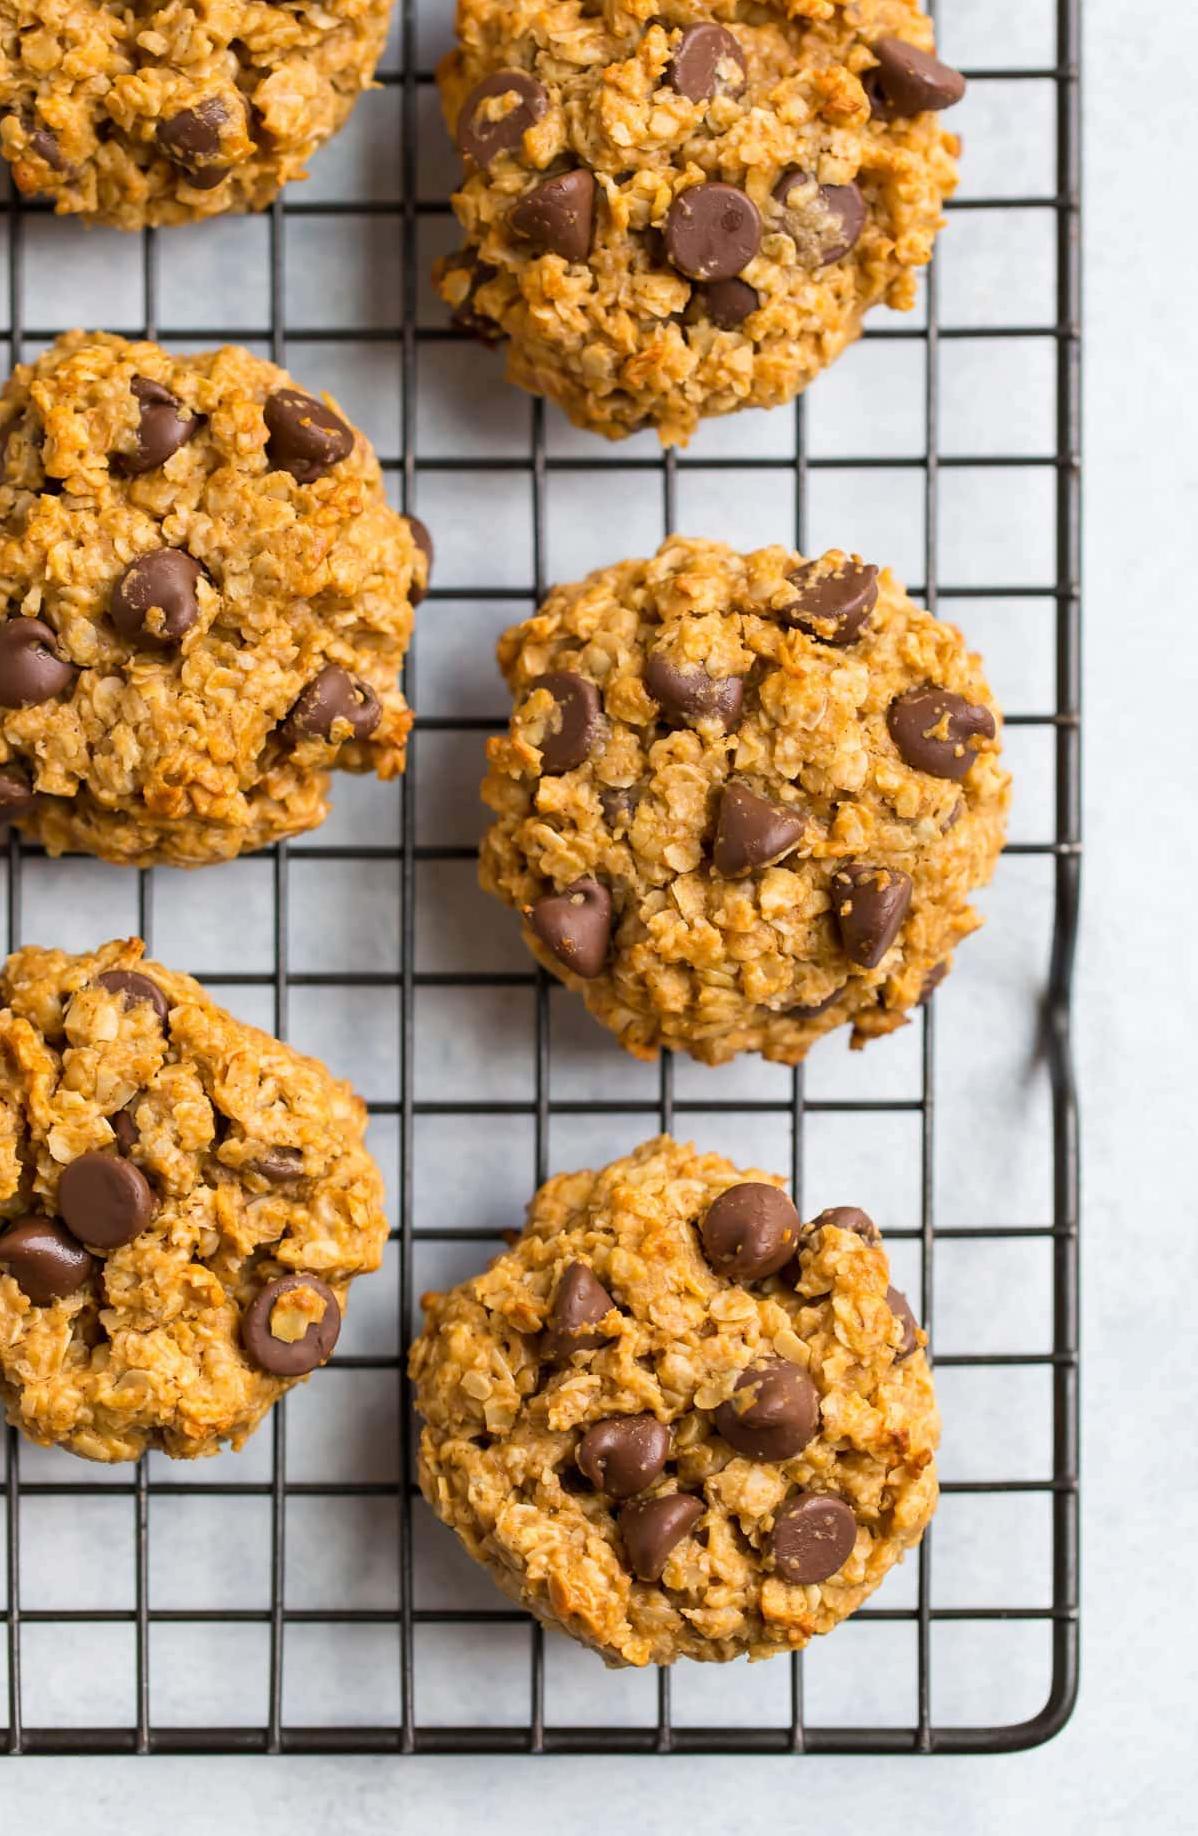  Pop one of these gluten-free cookies in your mouth, and experience the ultimate sensation; crispy